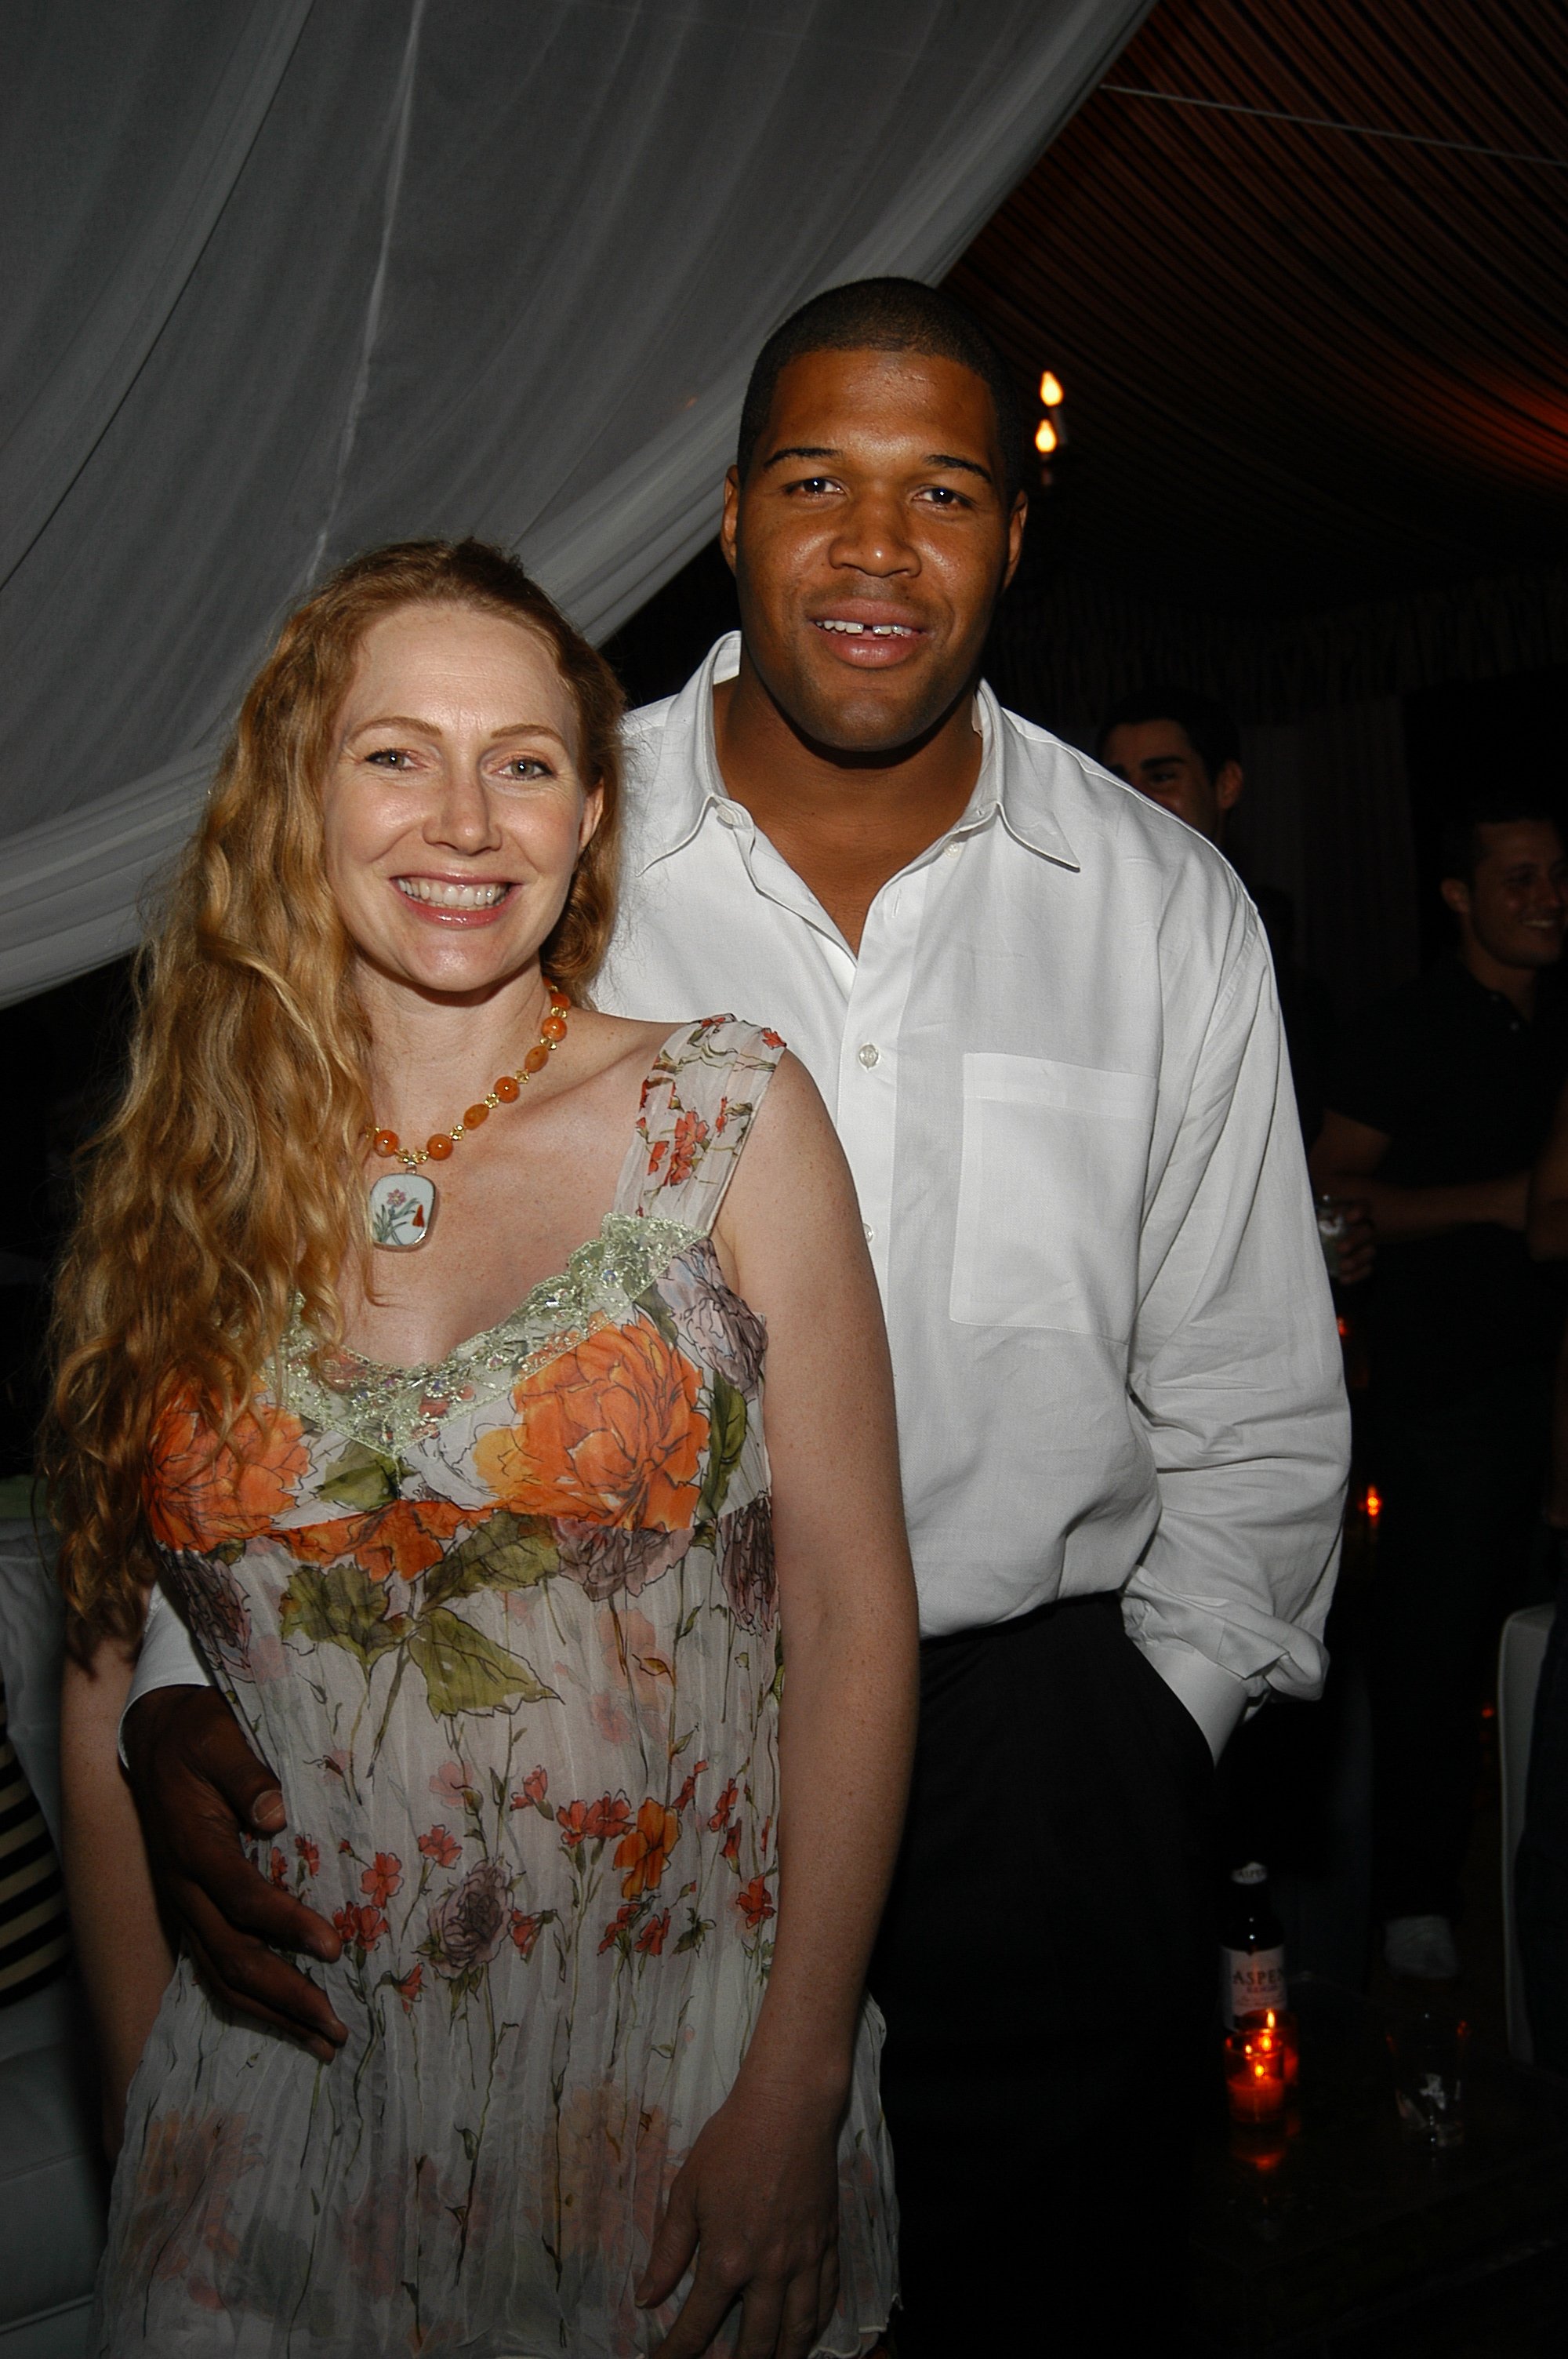 Jean and Michael Strahan at Andrew Rosen, on behalf of Theory, Hosts a Post-Screening Dinner to Celebrate "Riding Giants" on July 2, 2004, in Southampton, New York. | Source: Patrick McMullan/Getty Images